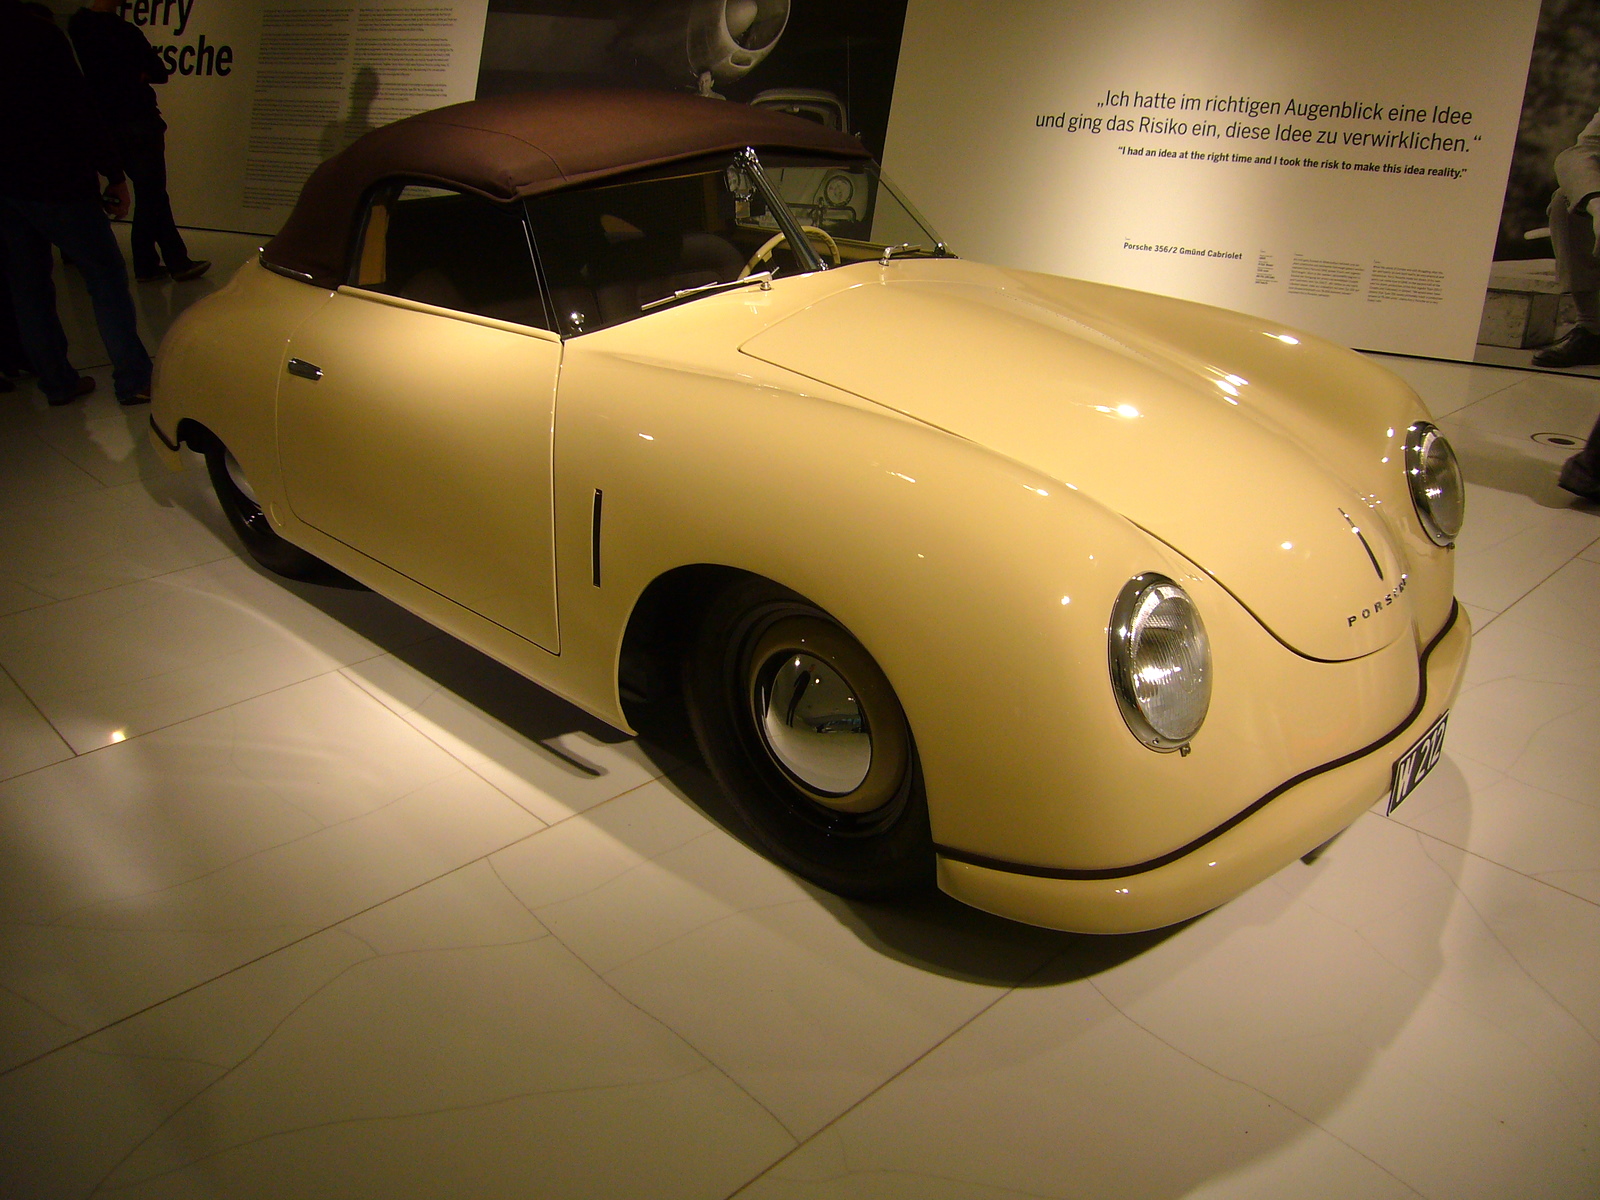 From 1955 up to 1964 Porsche